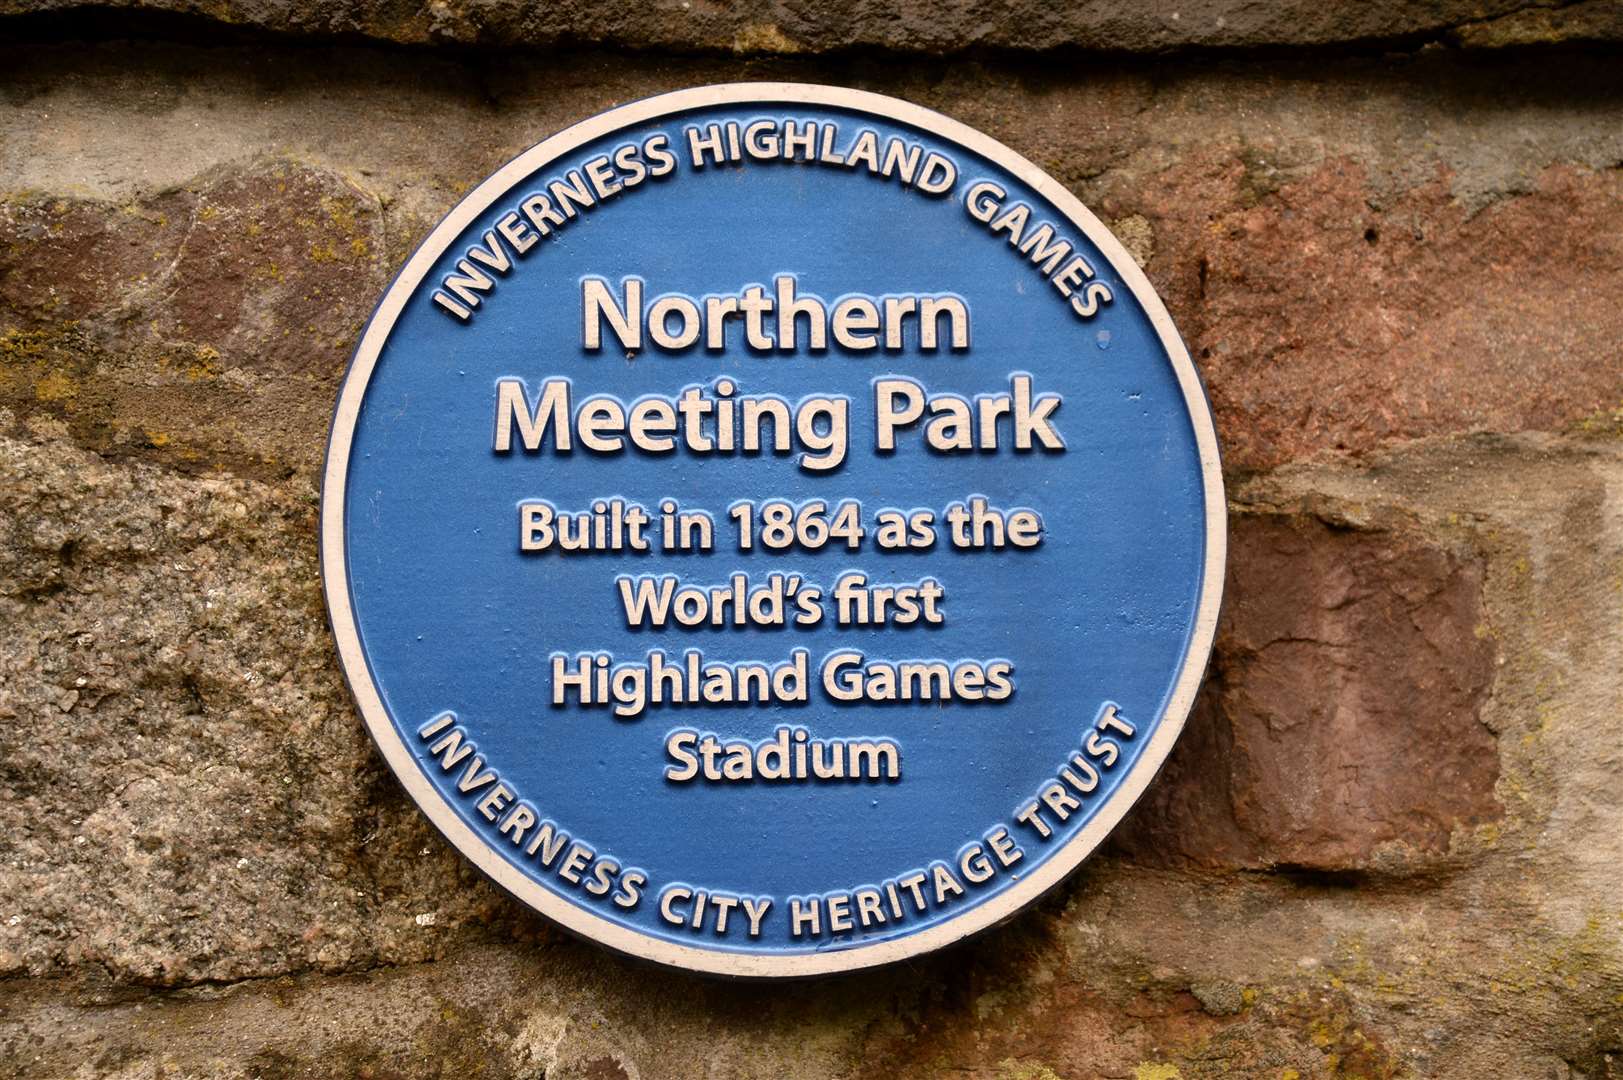 The Northern Meeting Park is home to the world's first Highland games stadium.